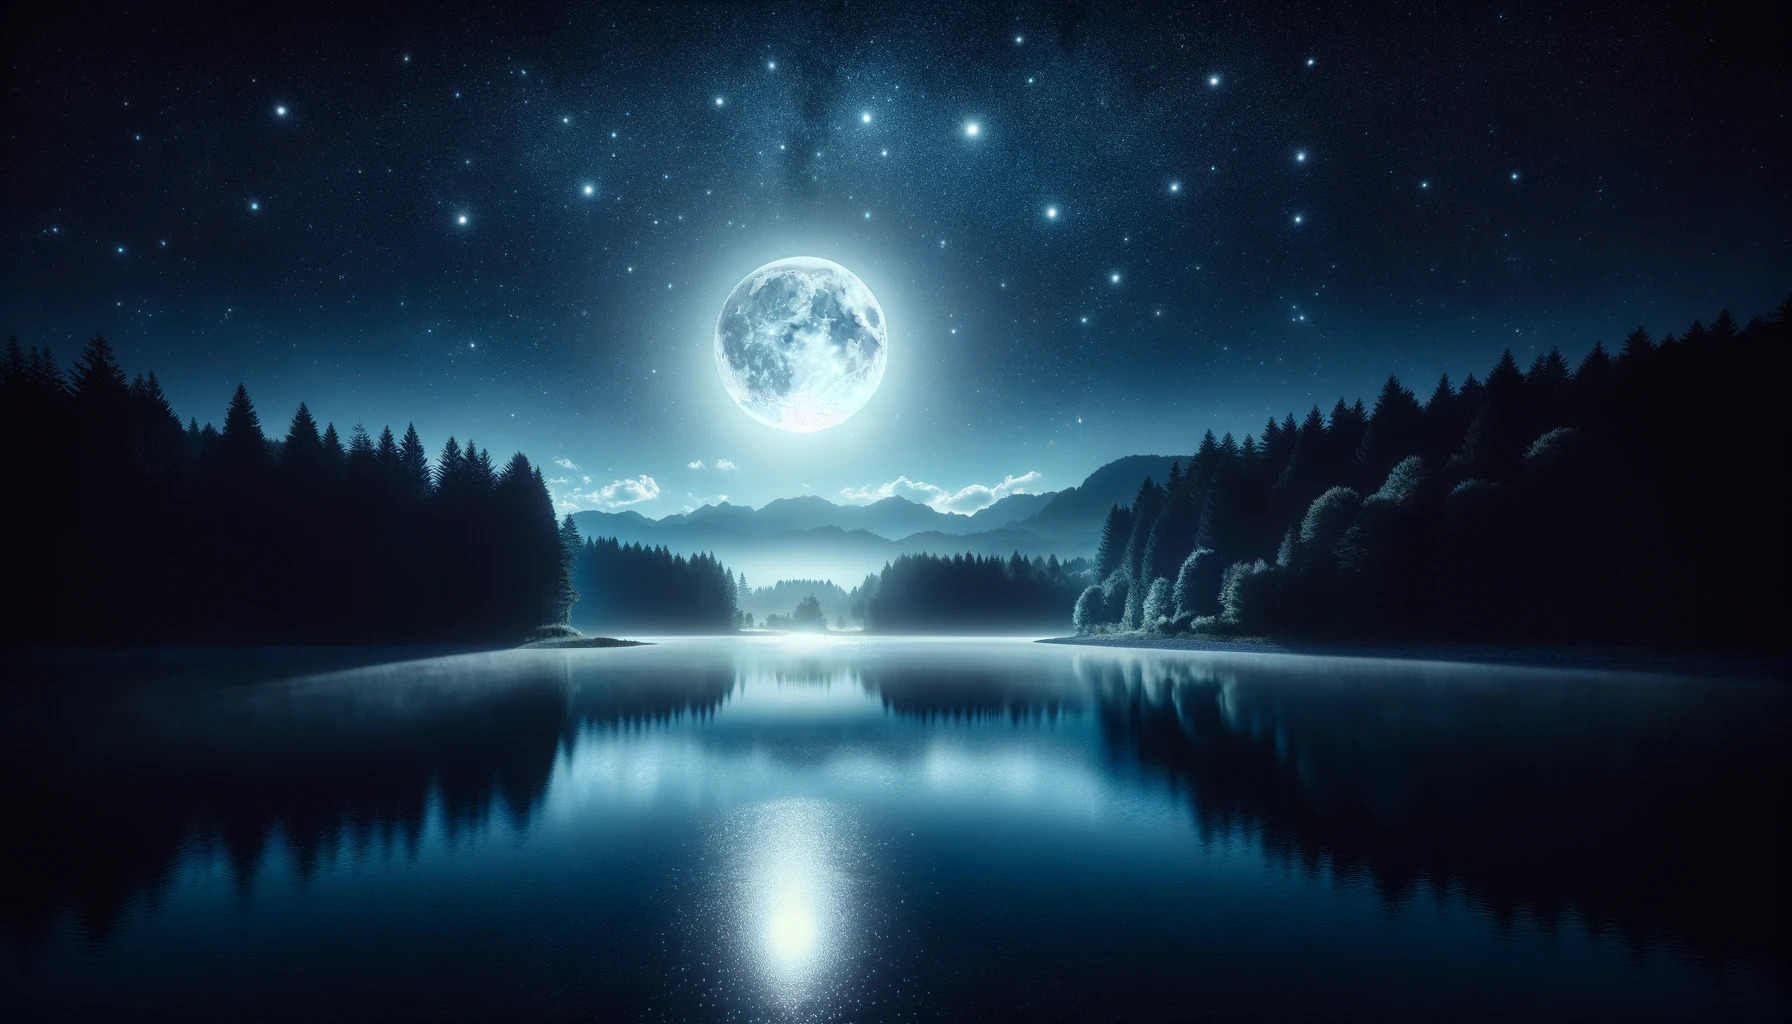 a cinematic image inspired by the theme of names that mean "moon". It captures a serene landscape at night, illuminated by the gentle glow of a full moon over a tranquil lake, surrounded by forests and distant mountains. The scene is designed to evoke a sense of calm and wonder, perfectly embodying the mystical and tranquil essence of the moonlit night.